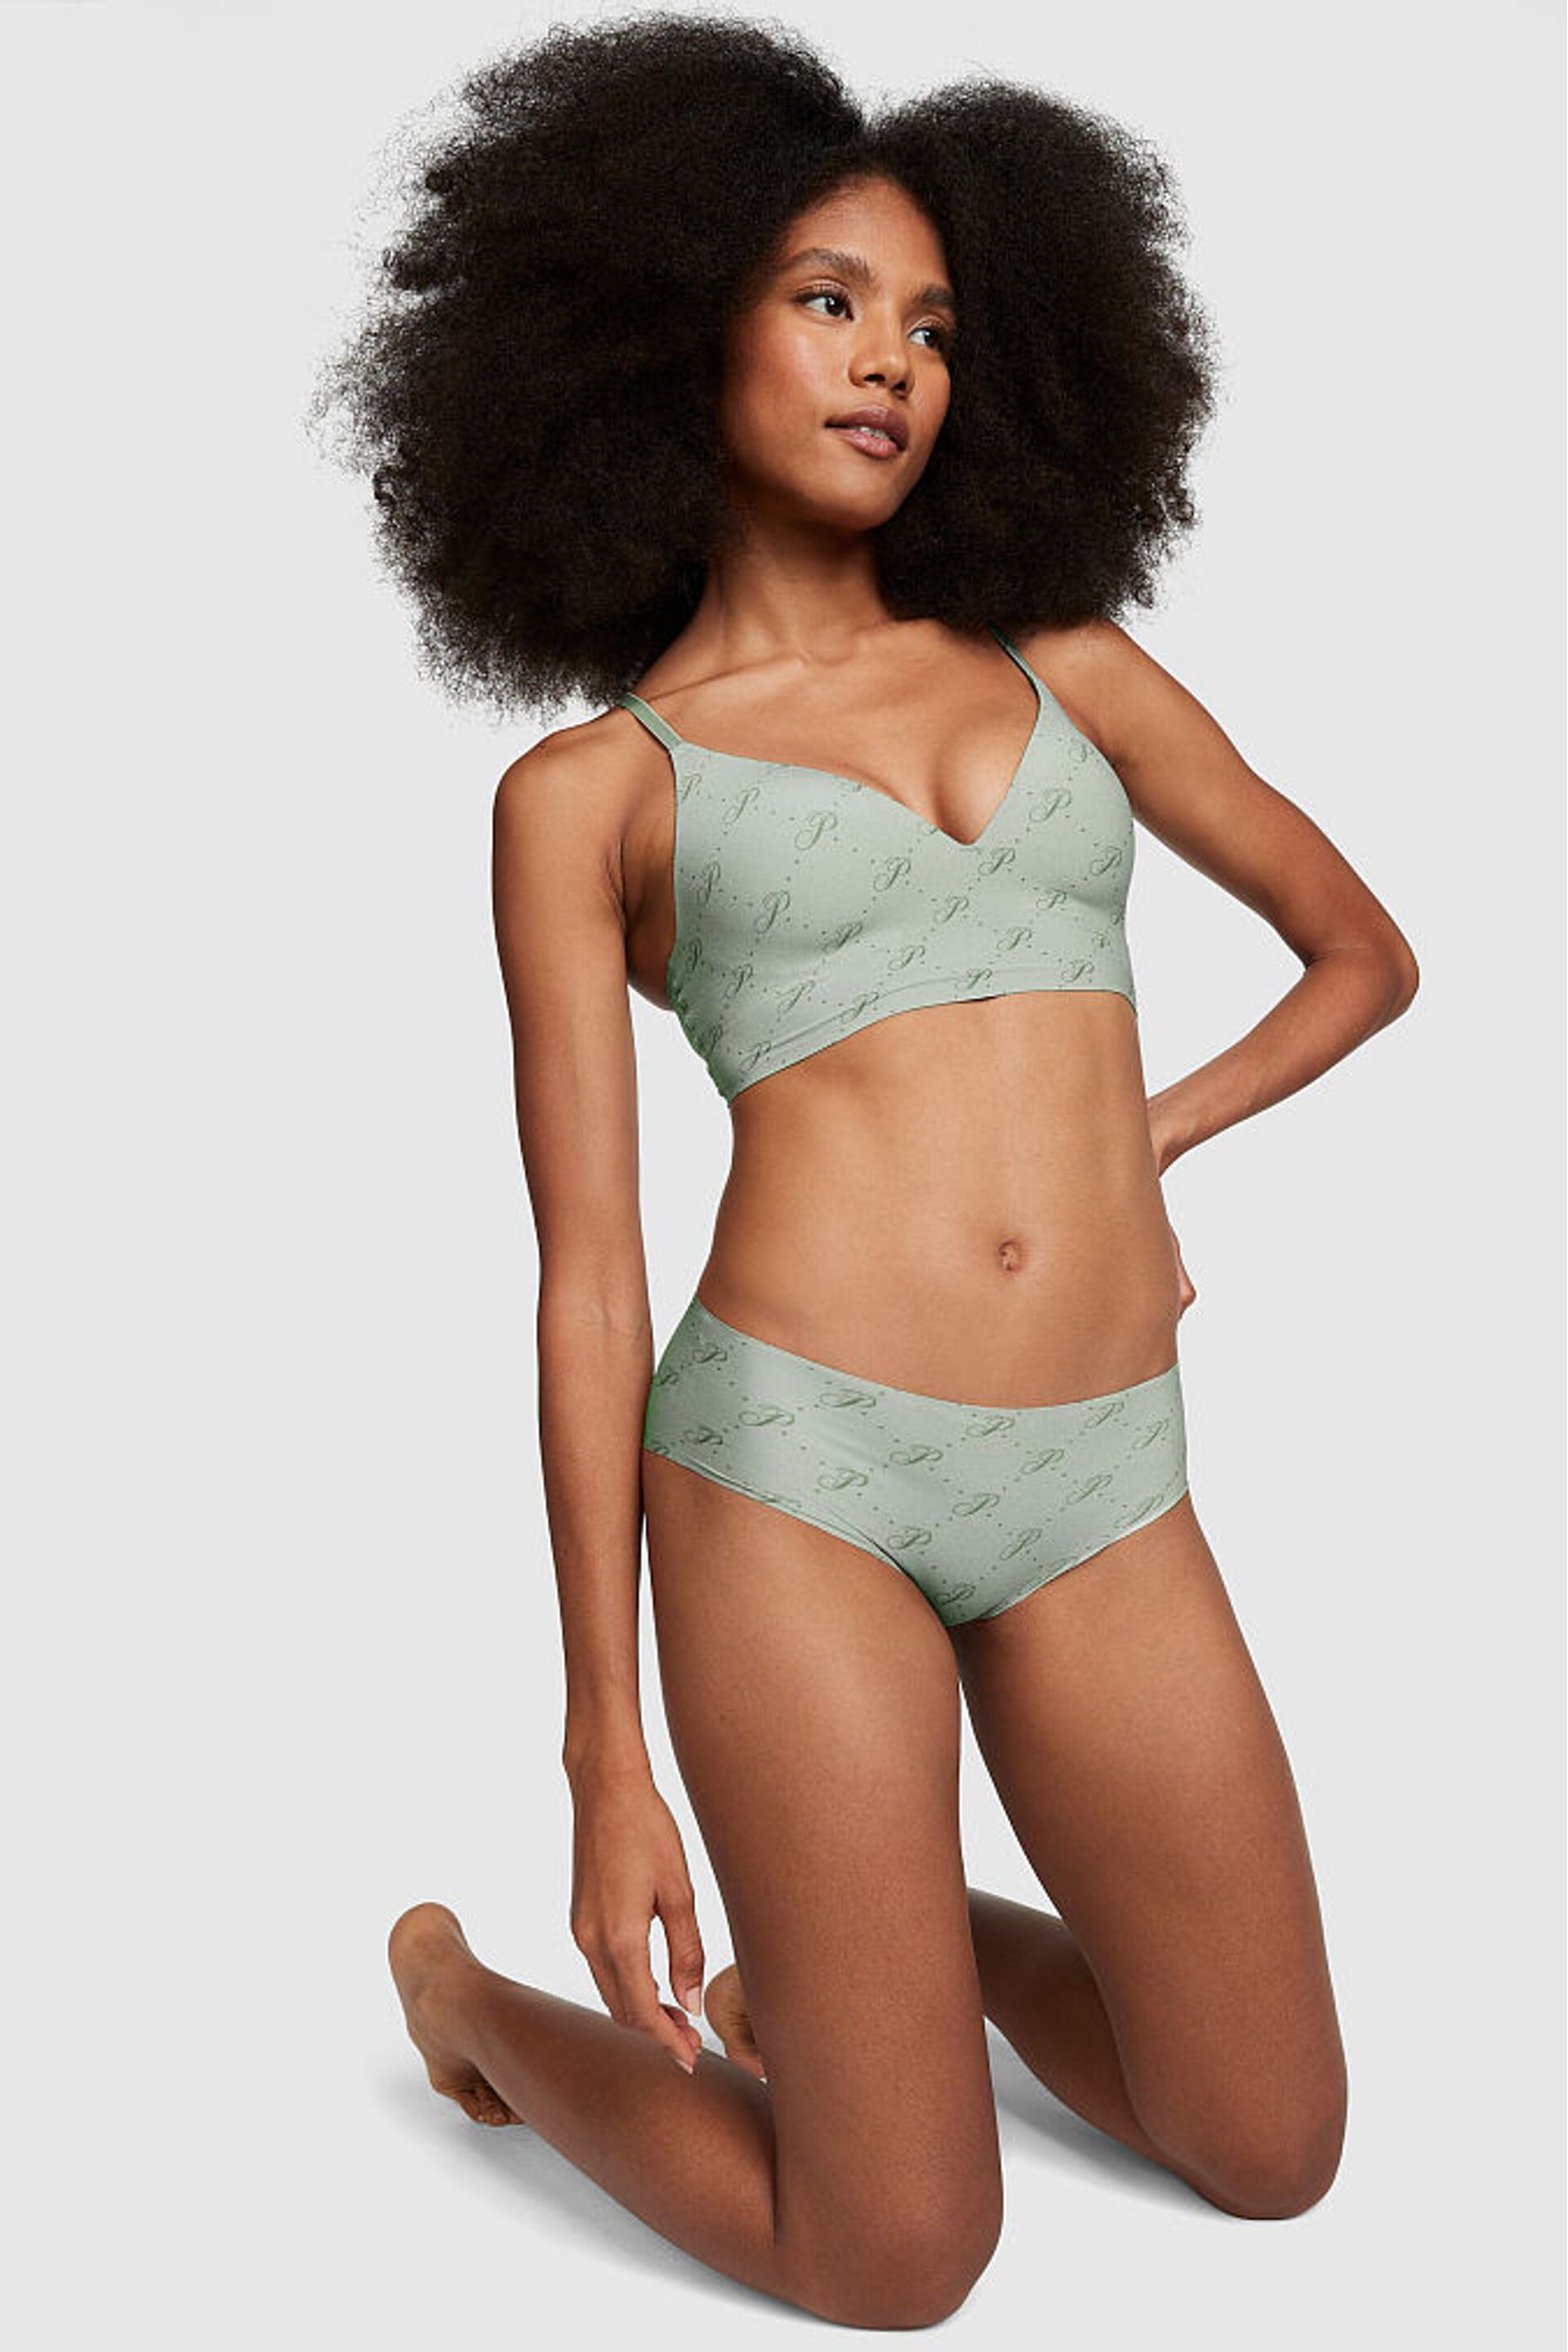 Victoria's Secret PINK Iceberg Green Script Non Wired Push Up Lounge Bralette - Image 3 of 4